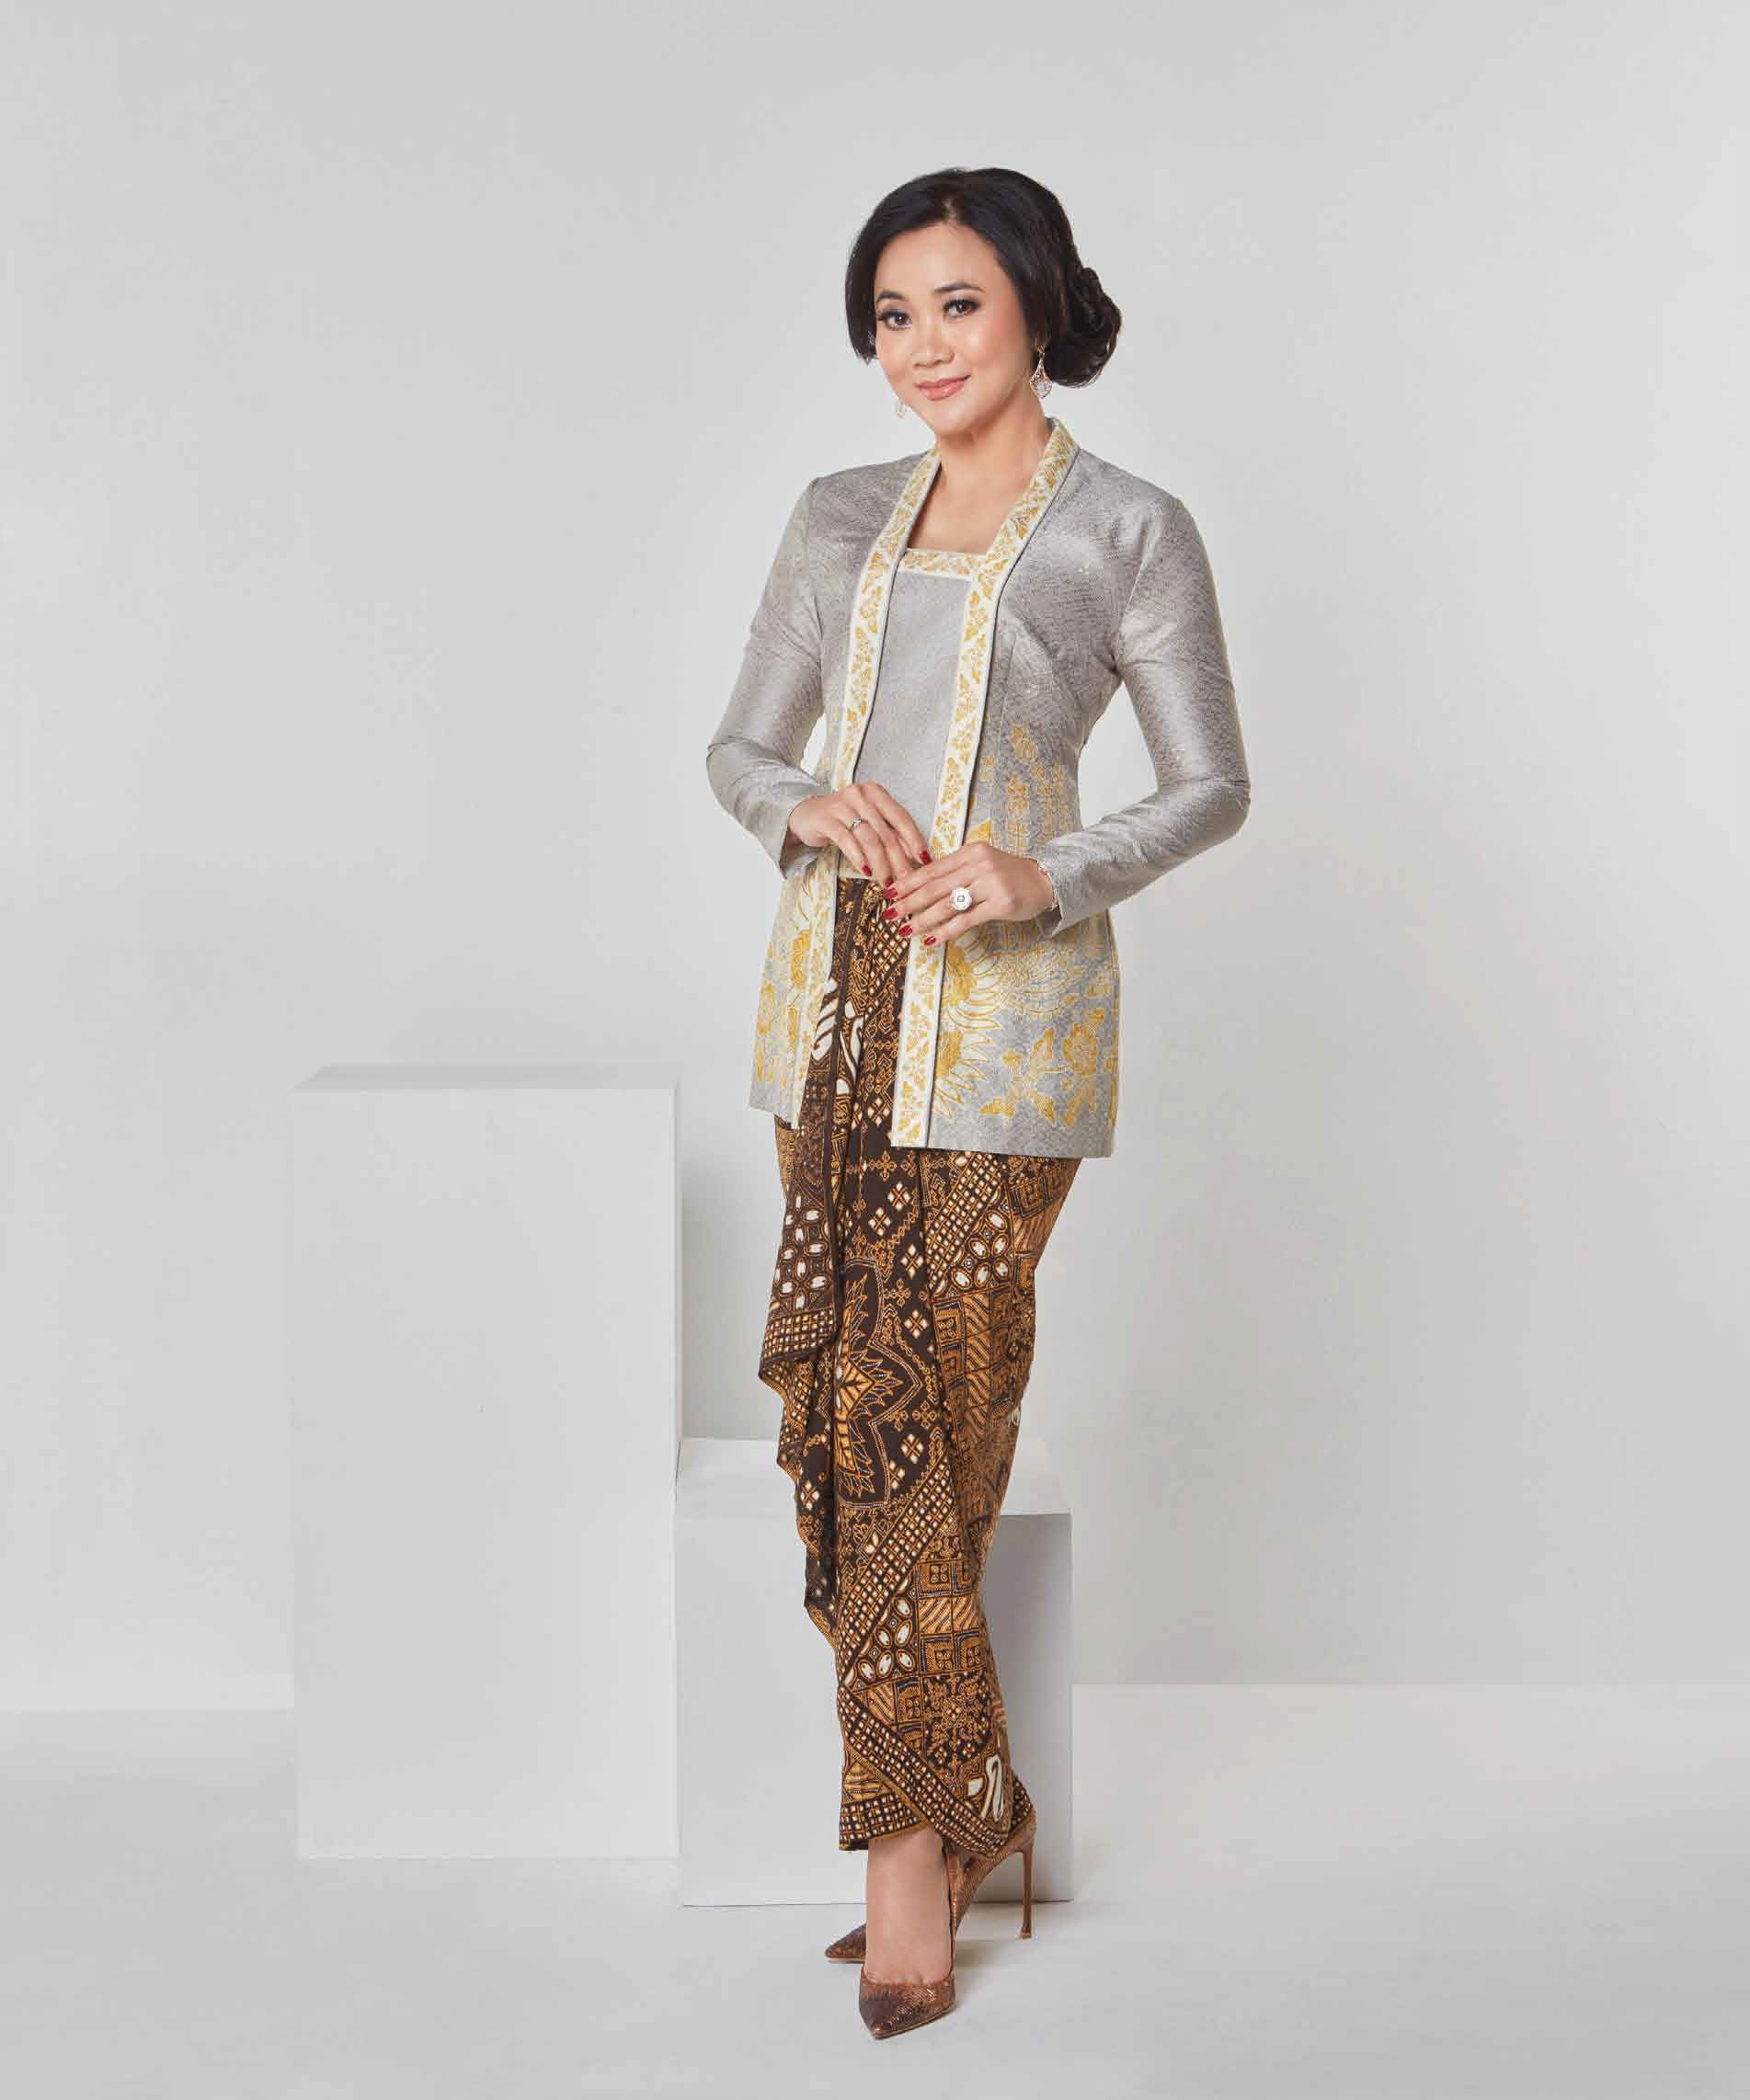 Ayu Rosan Speaks About Her Admiration for Indonesian Designer Iwan Tirta